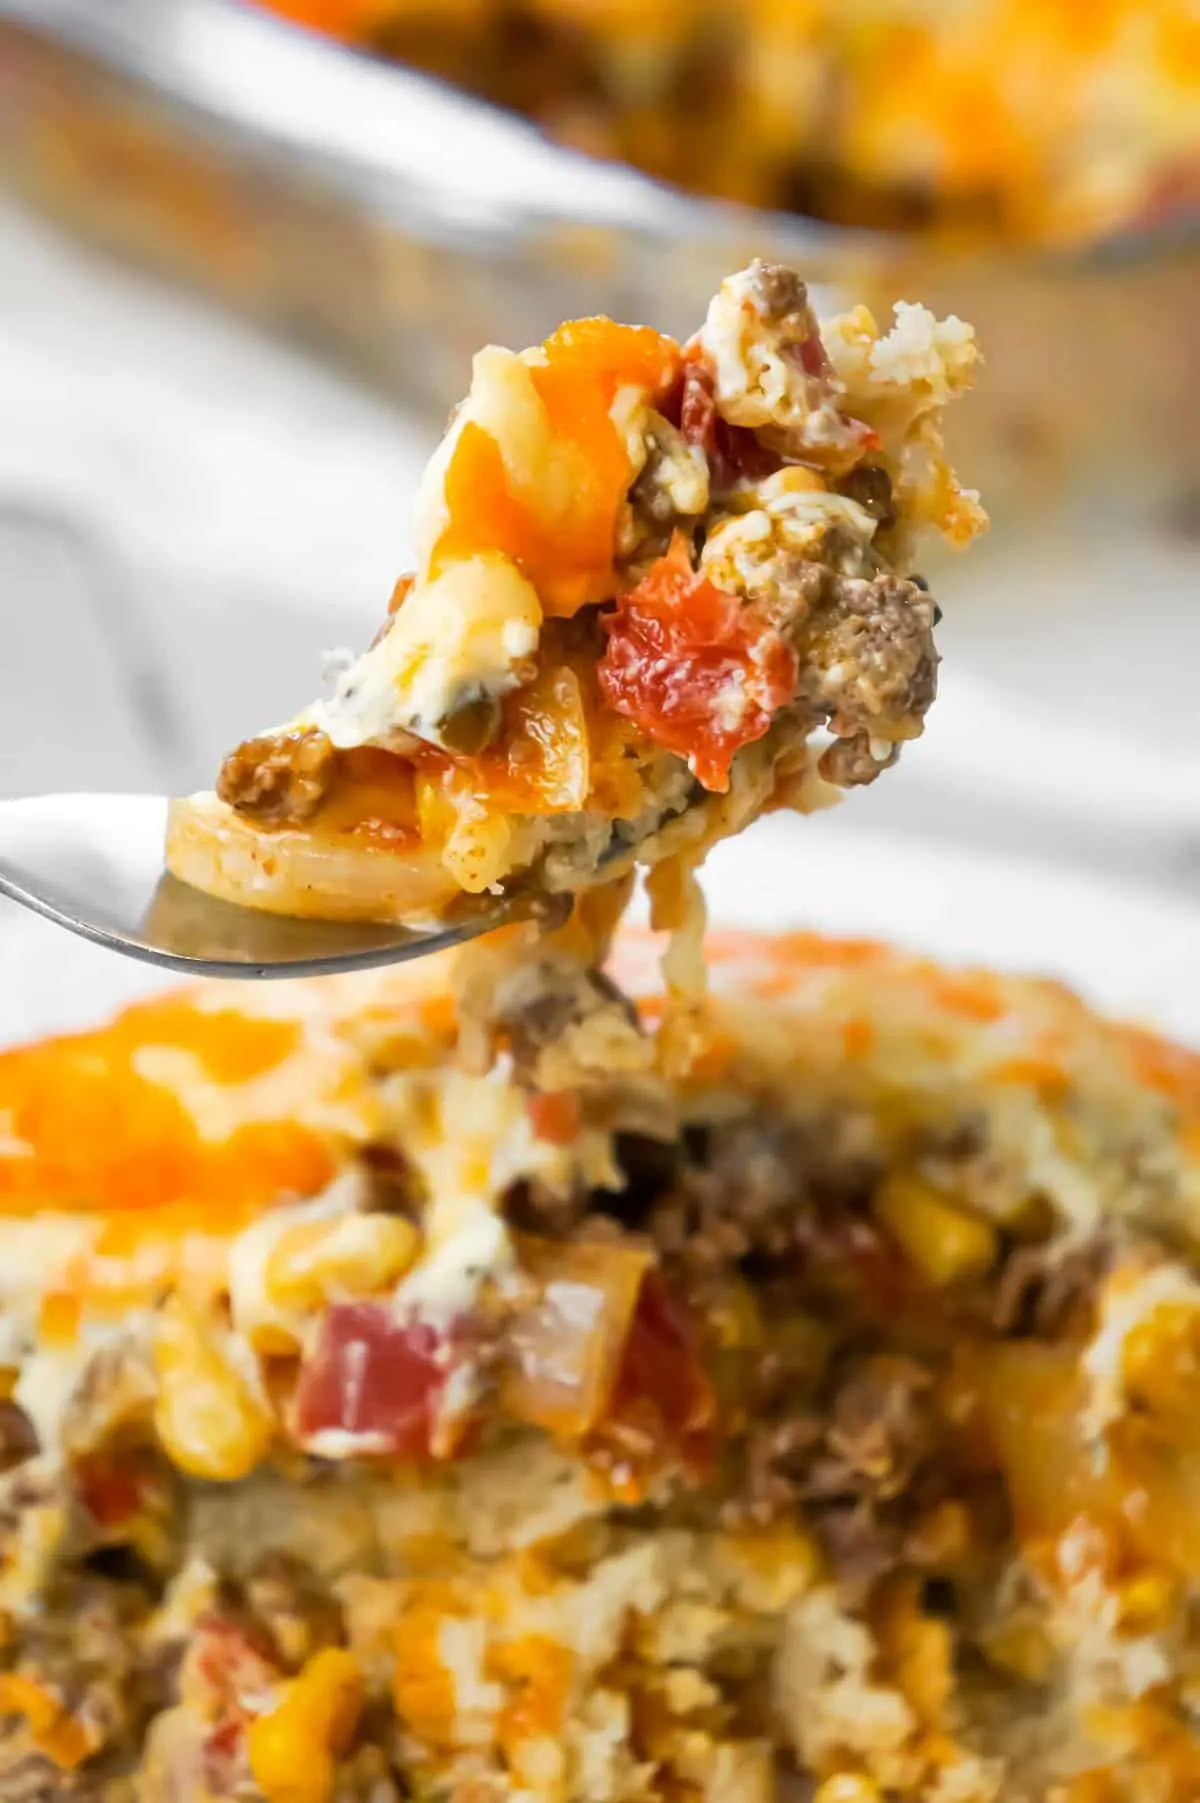 John Wayne Casserole is an easy ground beef casserole recipe with a biscuit base and loaded with diced tomatoes, corn, taco seasoning, cream cheese, mozzarella and cheddar.